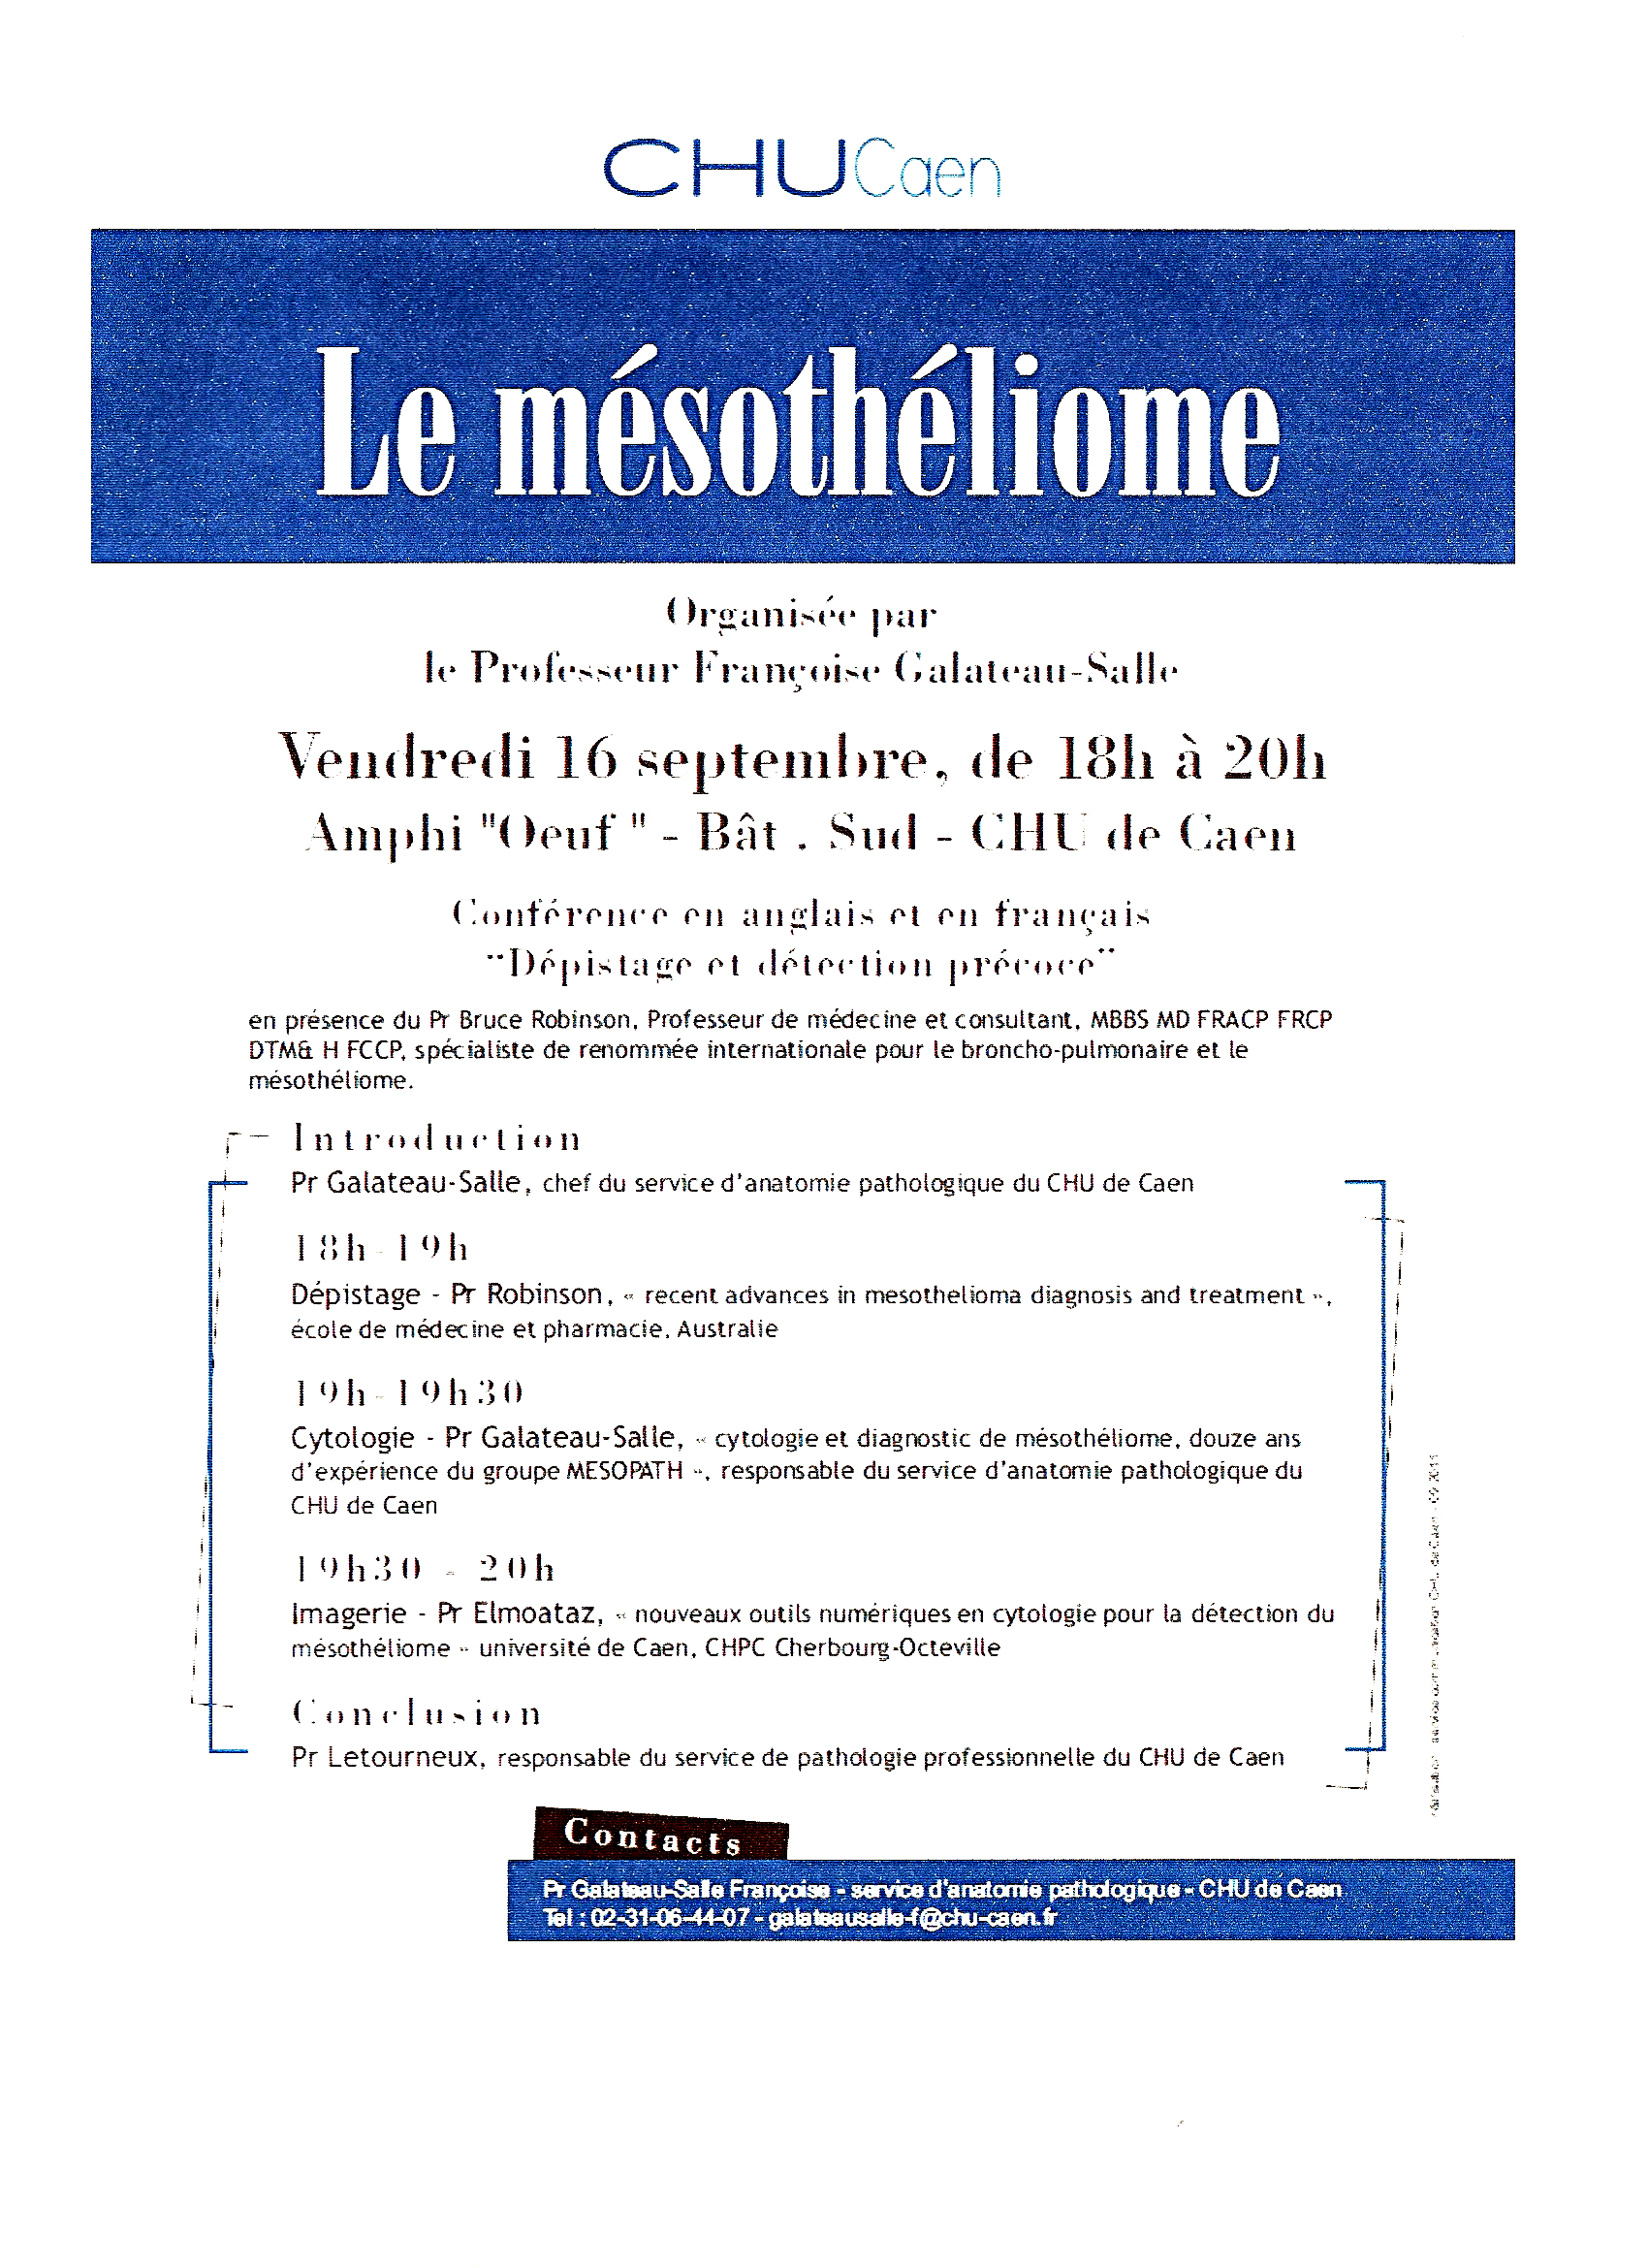 2011 09 16 conference mesotheliome CHU Caen affiche